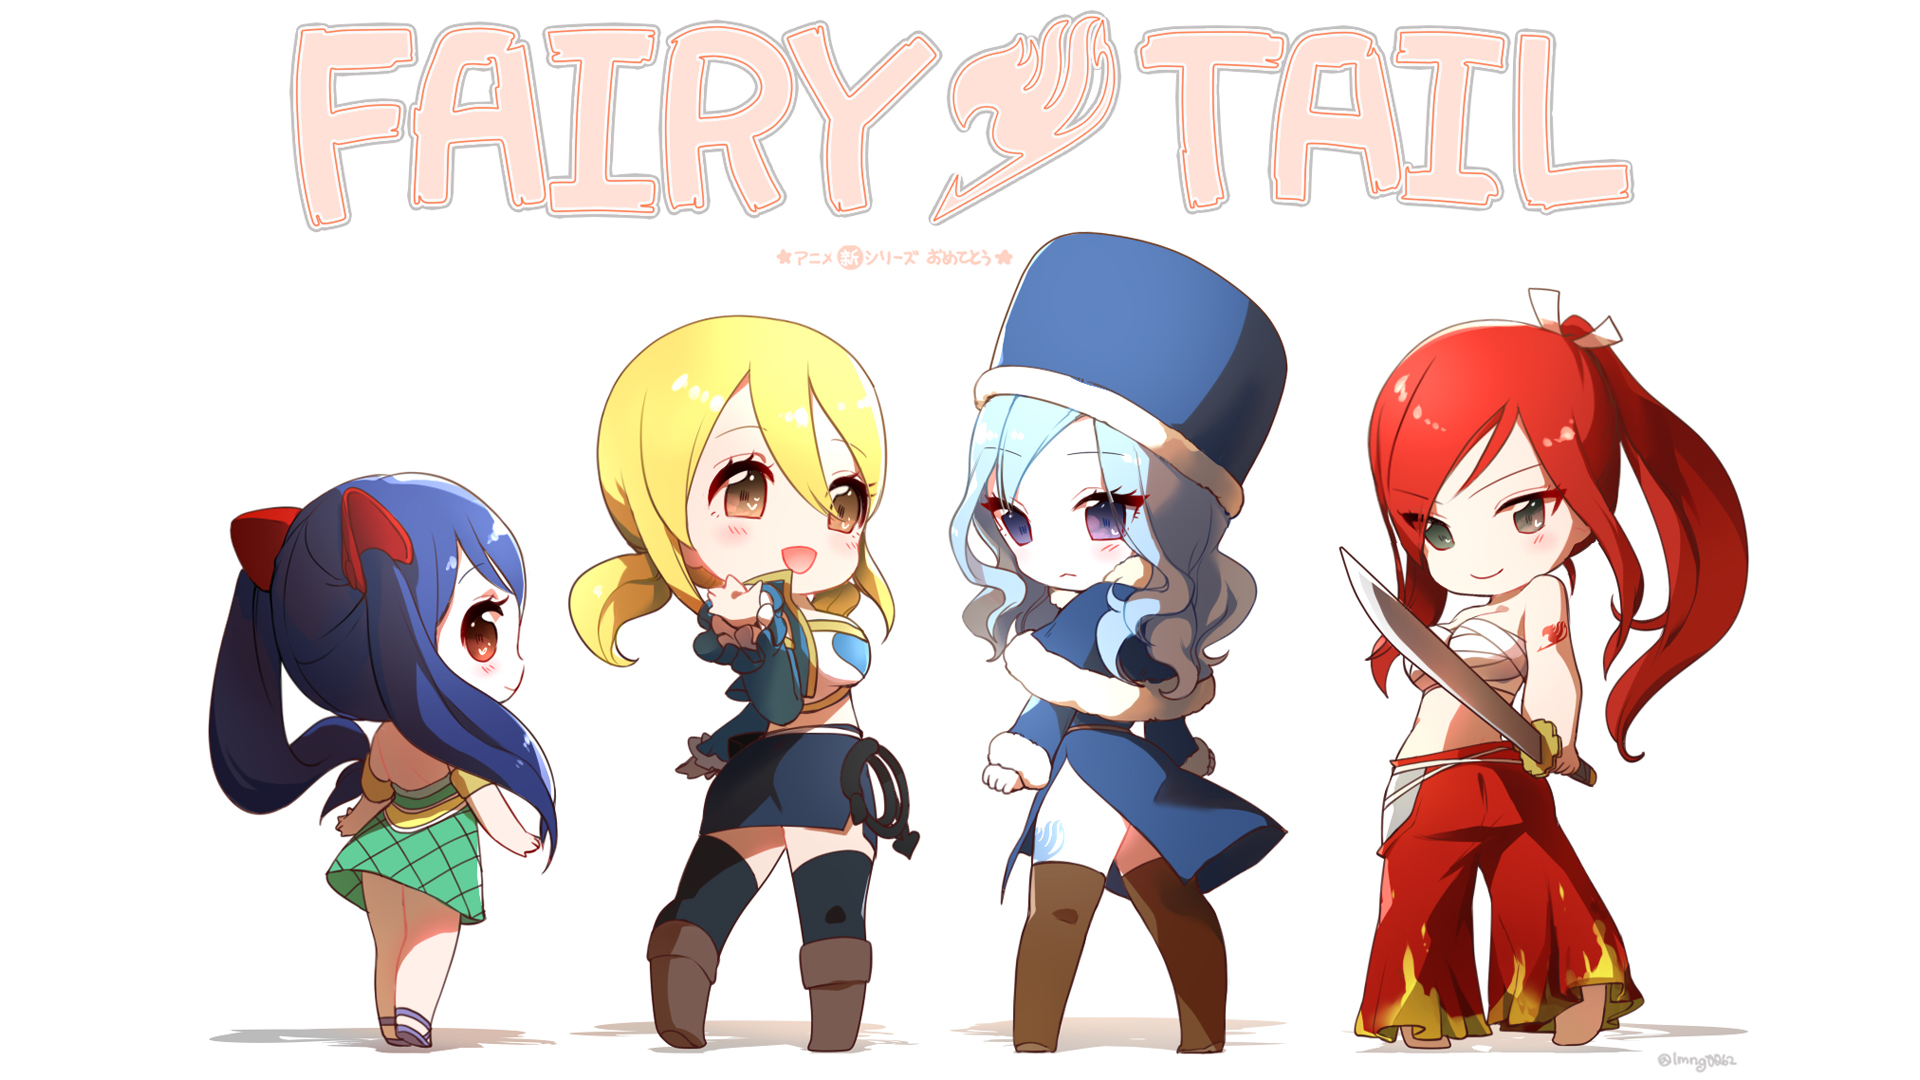 Anime Girl Chibi Fairy Tail Wendy Marvell Lucy Heartfilia - Fairy Tail Chibi Background - HD Wallpaper 